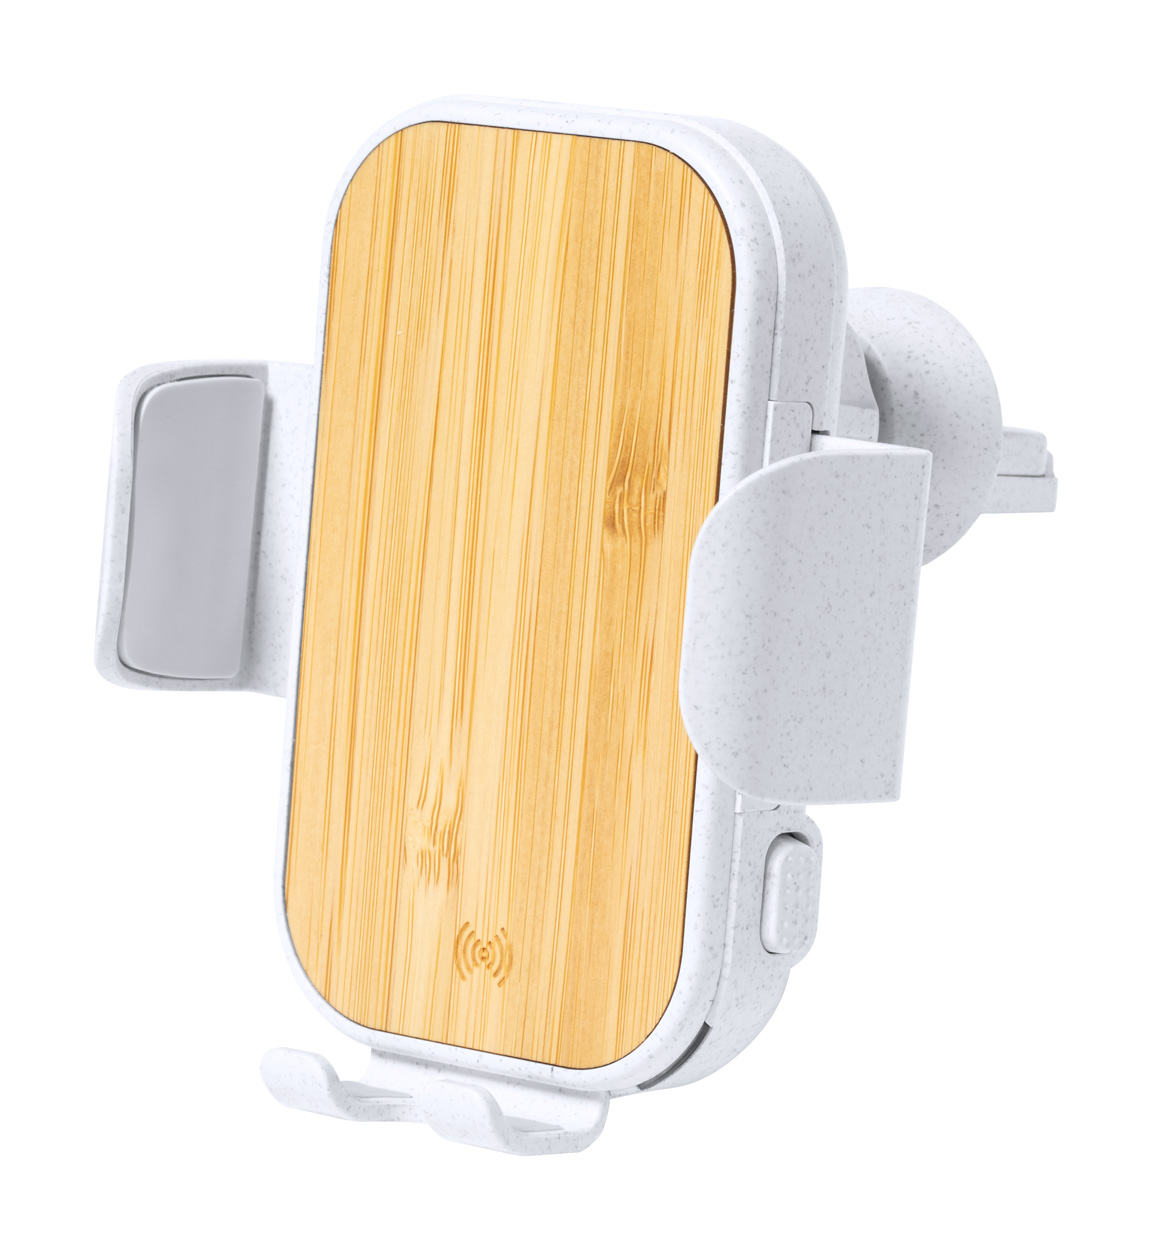 Yaben mobile phone holder with charger - white